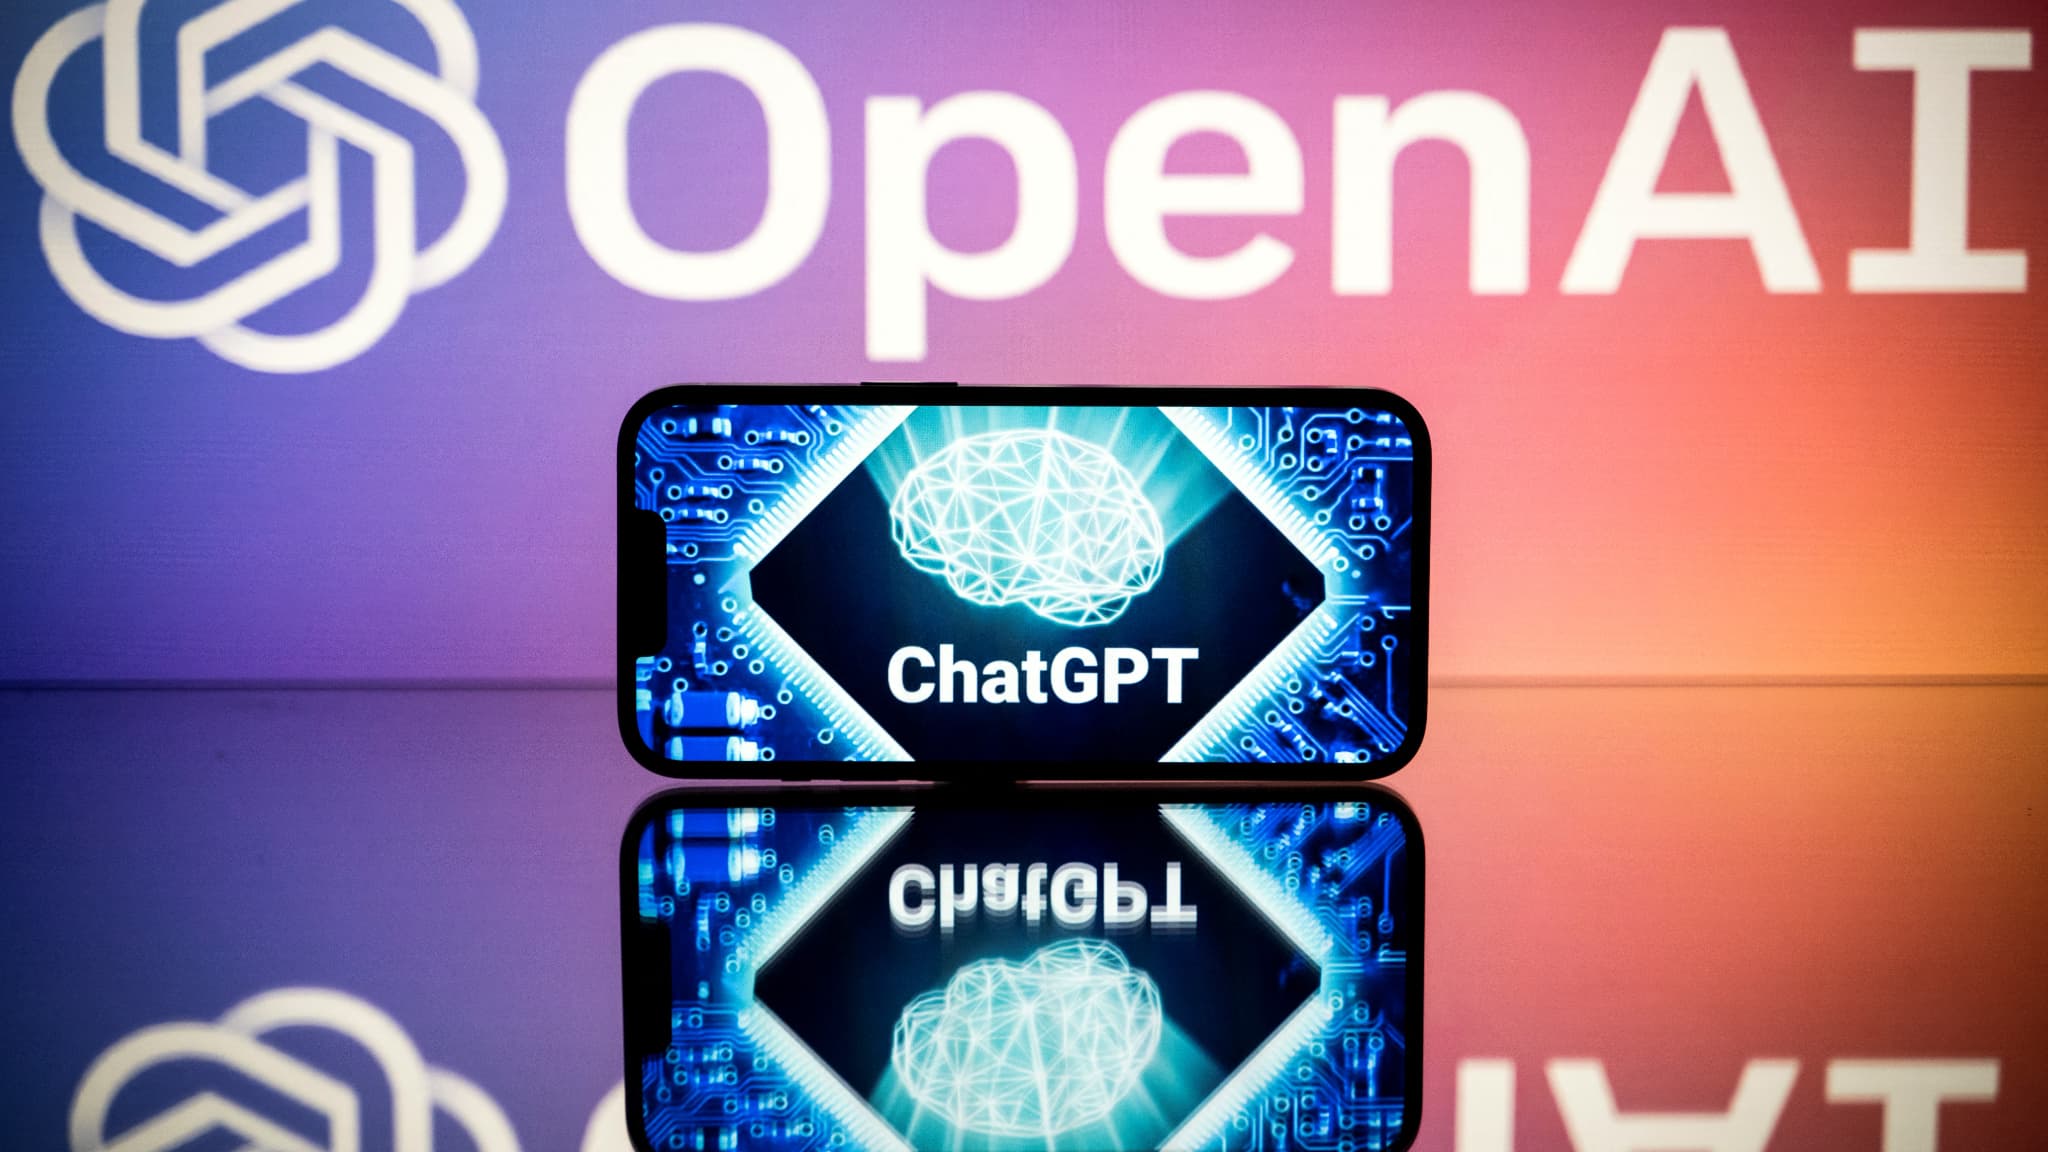 In the United States, half of the companies using ChatGPT are already exempt